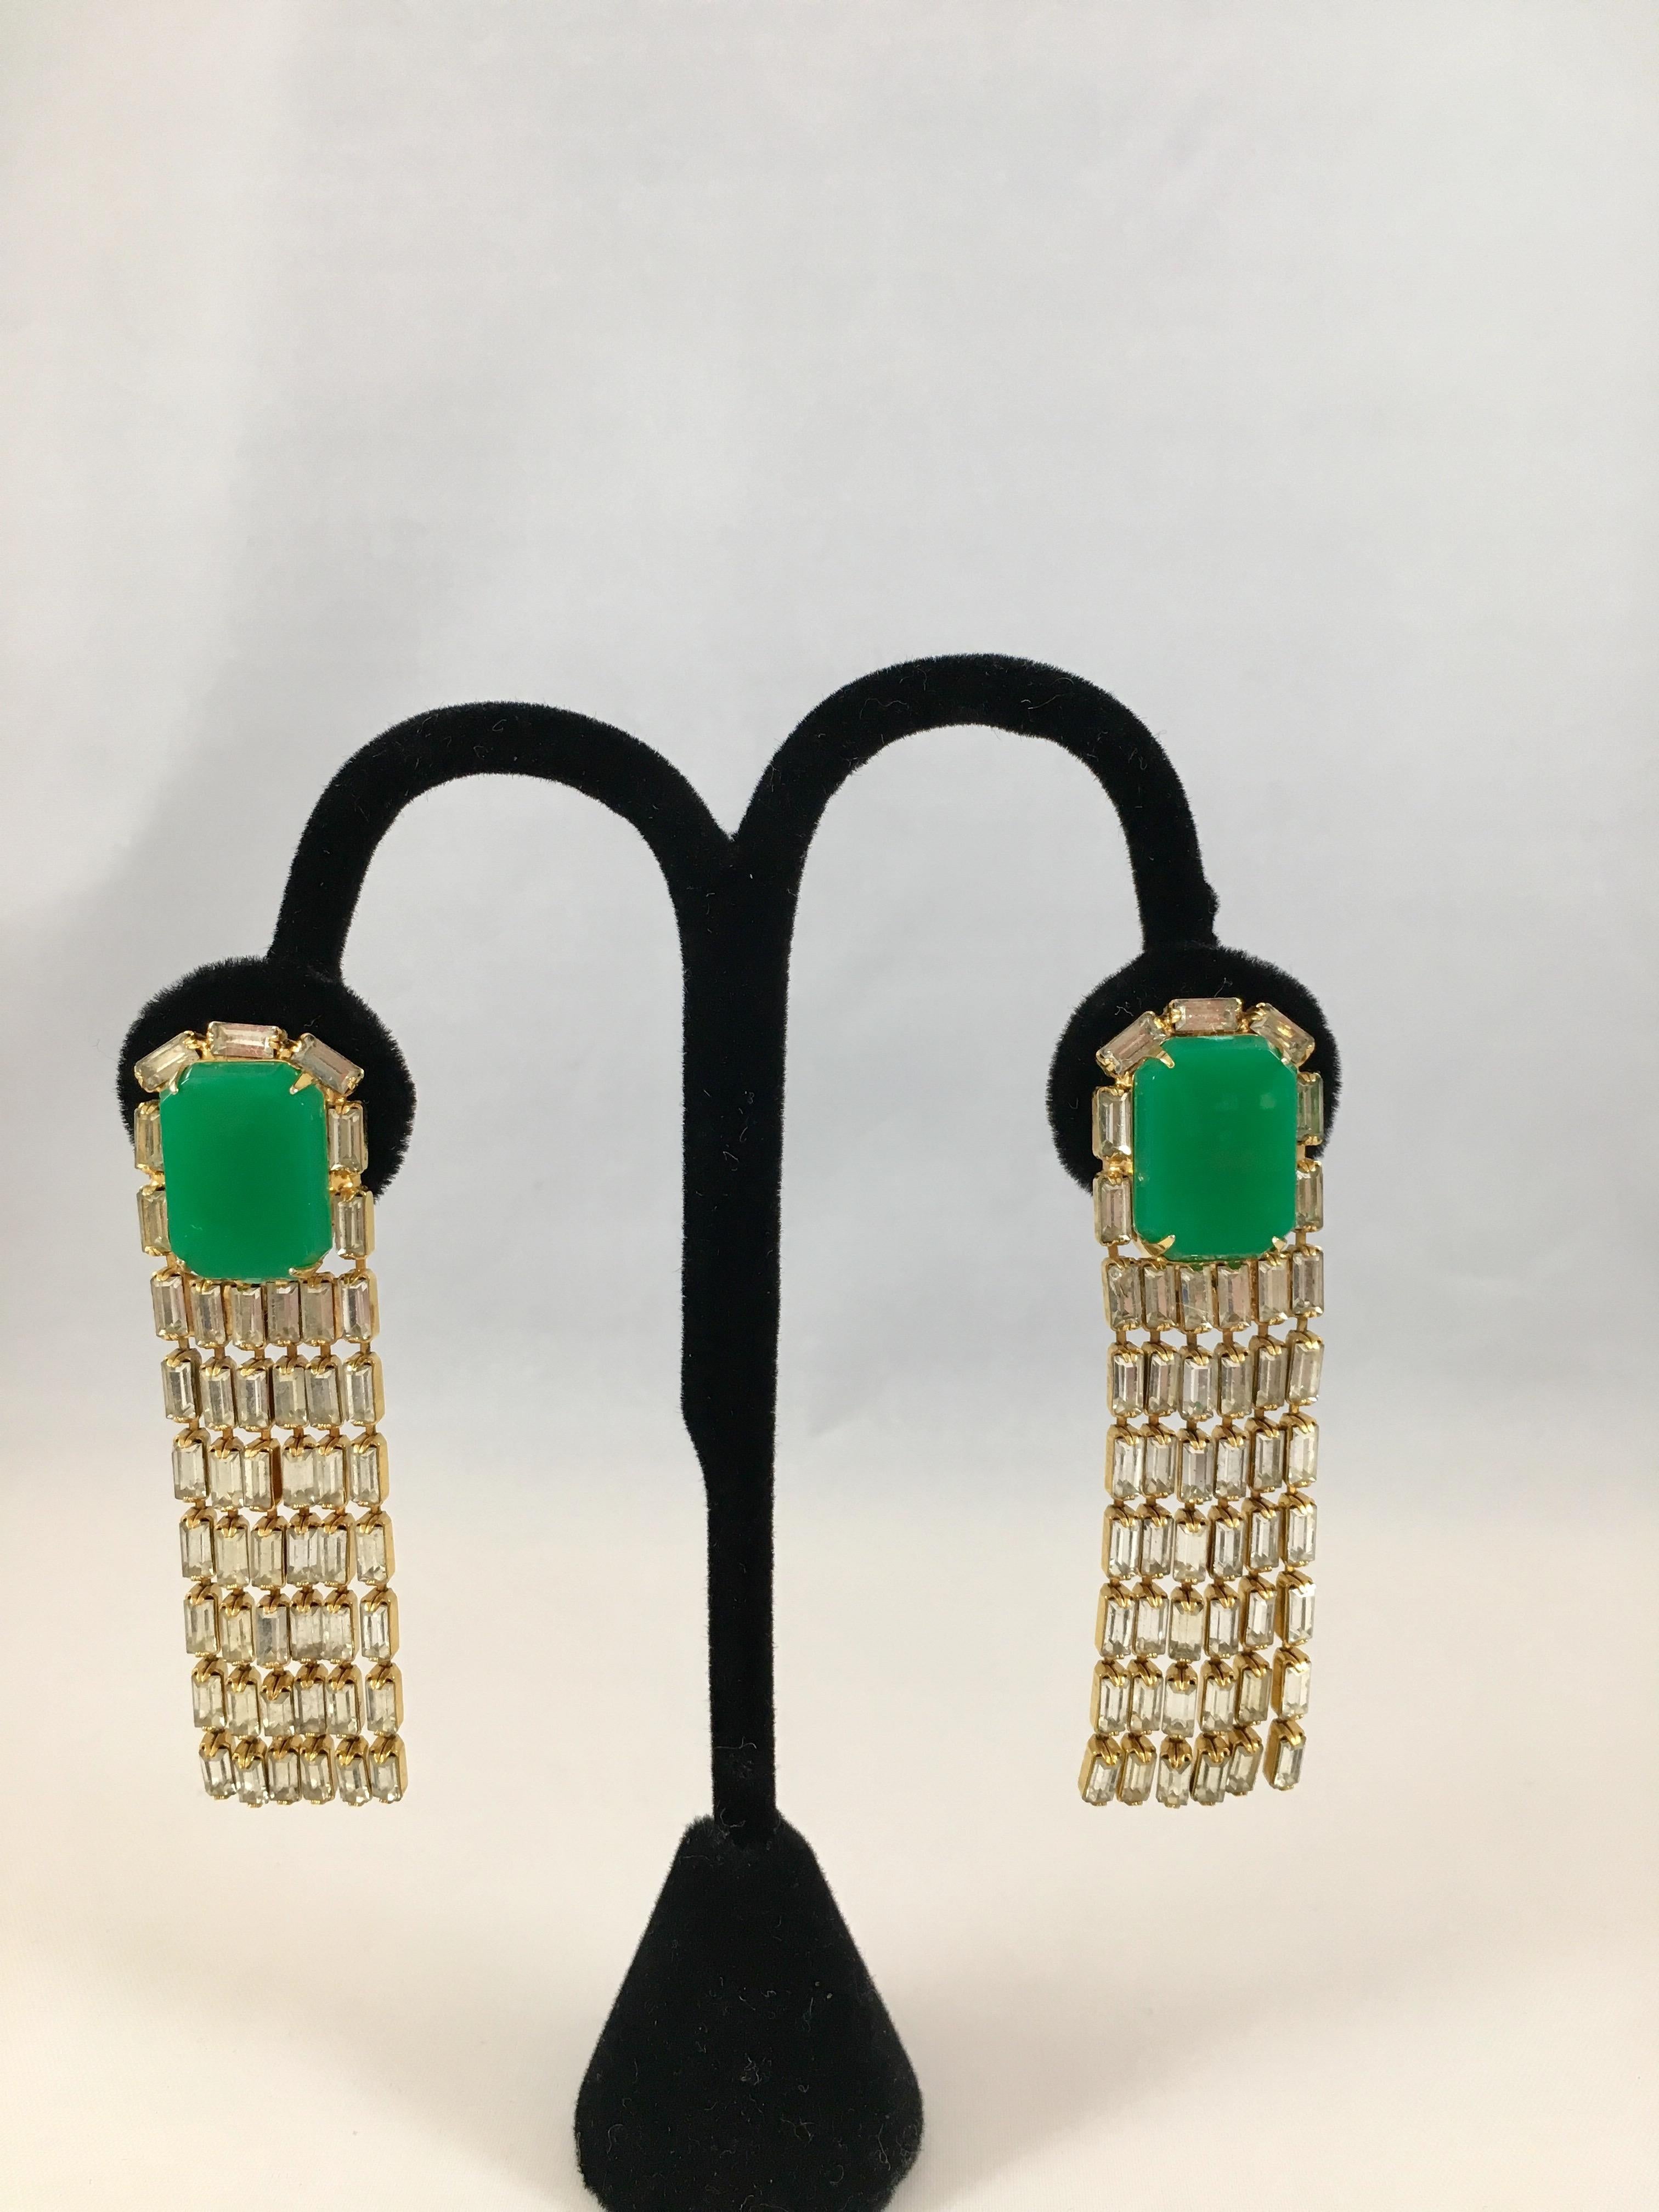 Kenneth Jay Lane K.J.L. Geometric Multi-Strand Chandelier Earrings 1970s In Excellent Condition For Sale In Chicago, IL